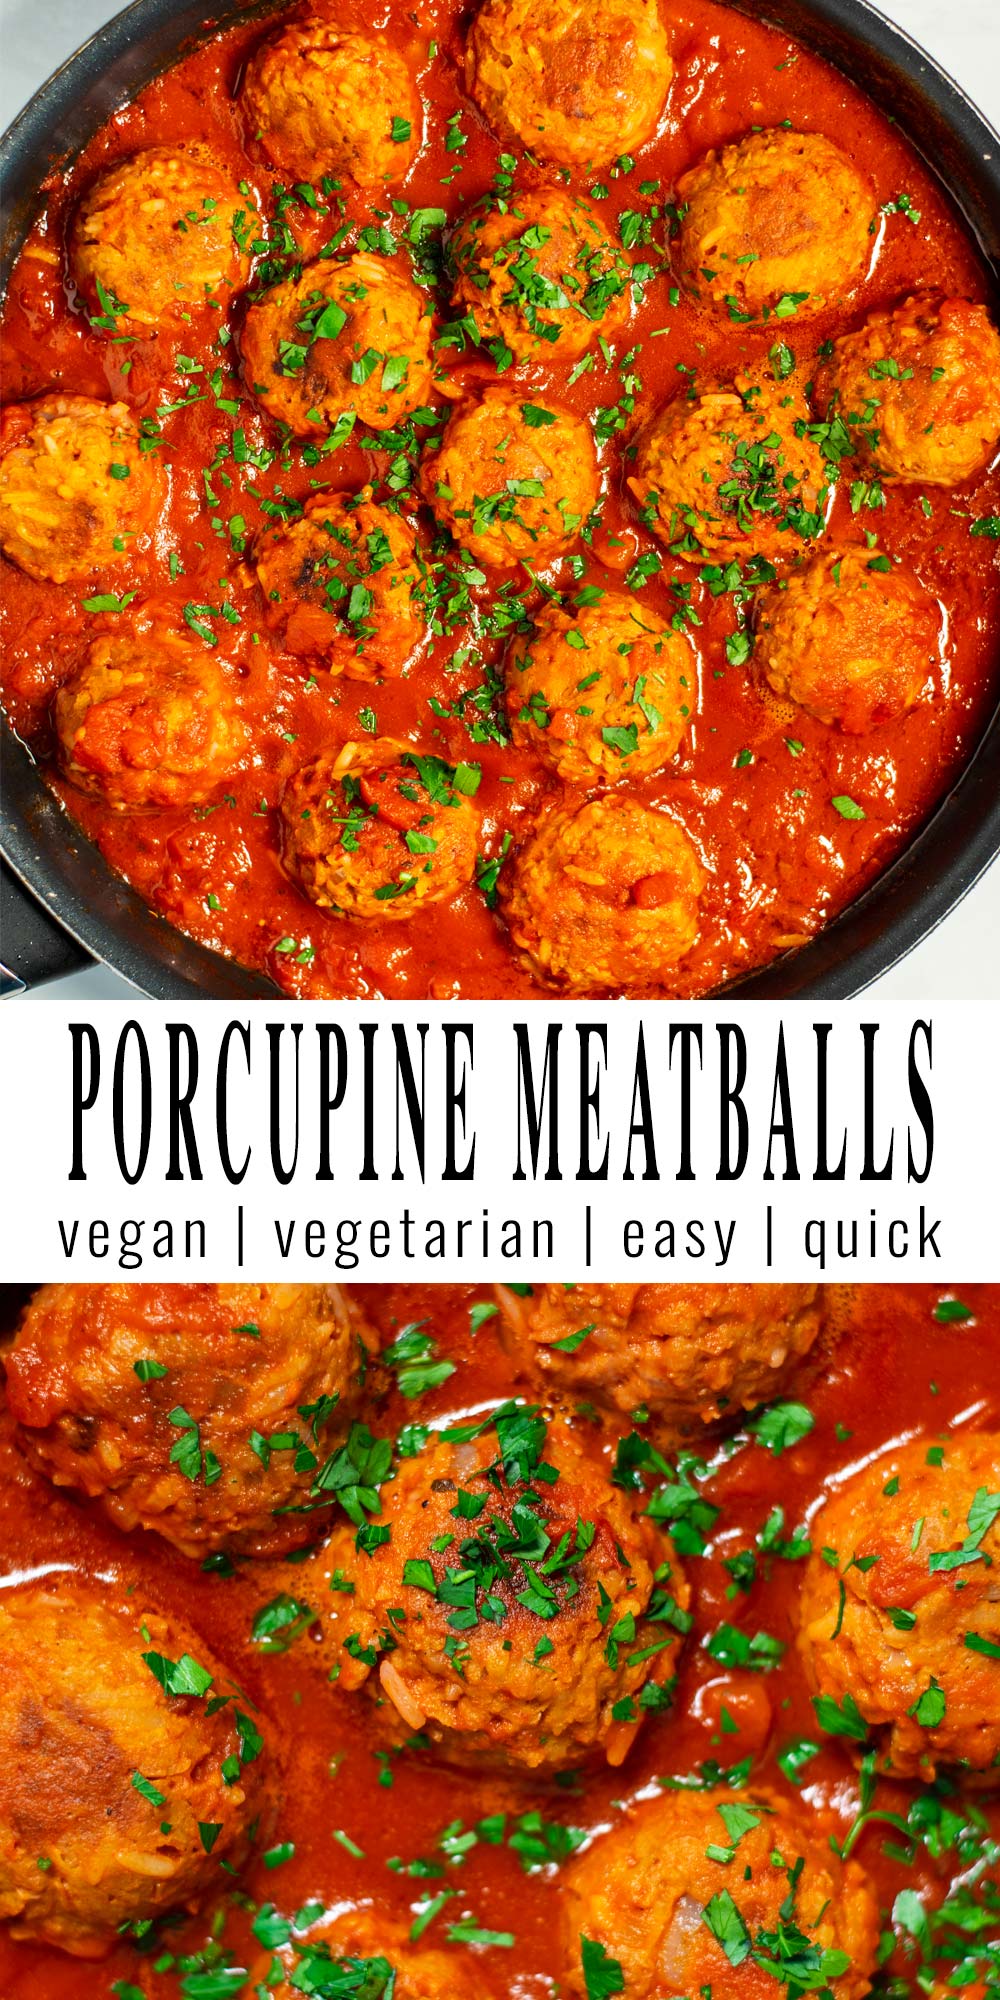 Collage of two pictures of Porcupine Meatballs with recipe title text.